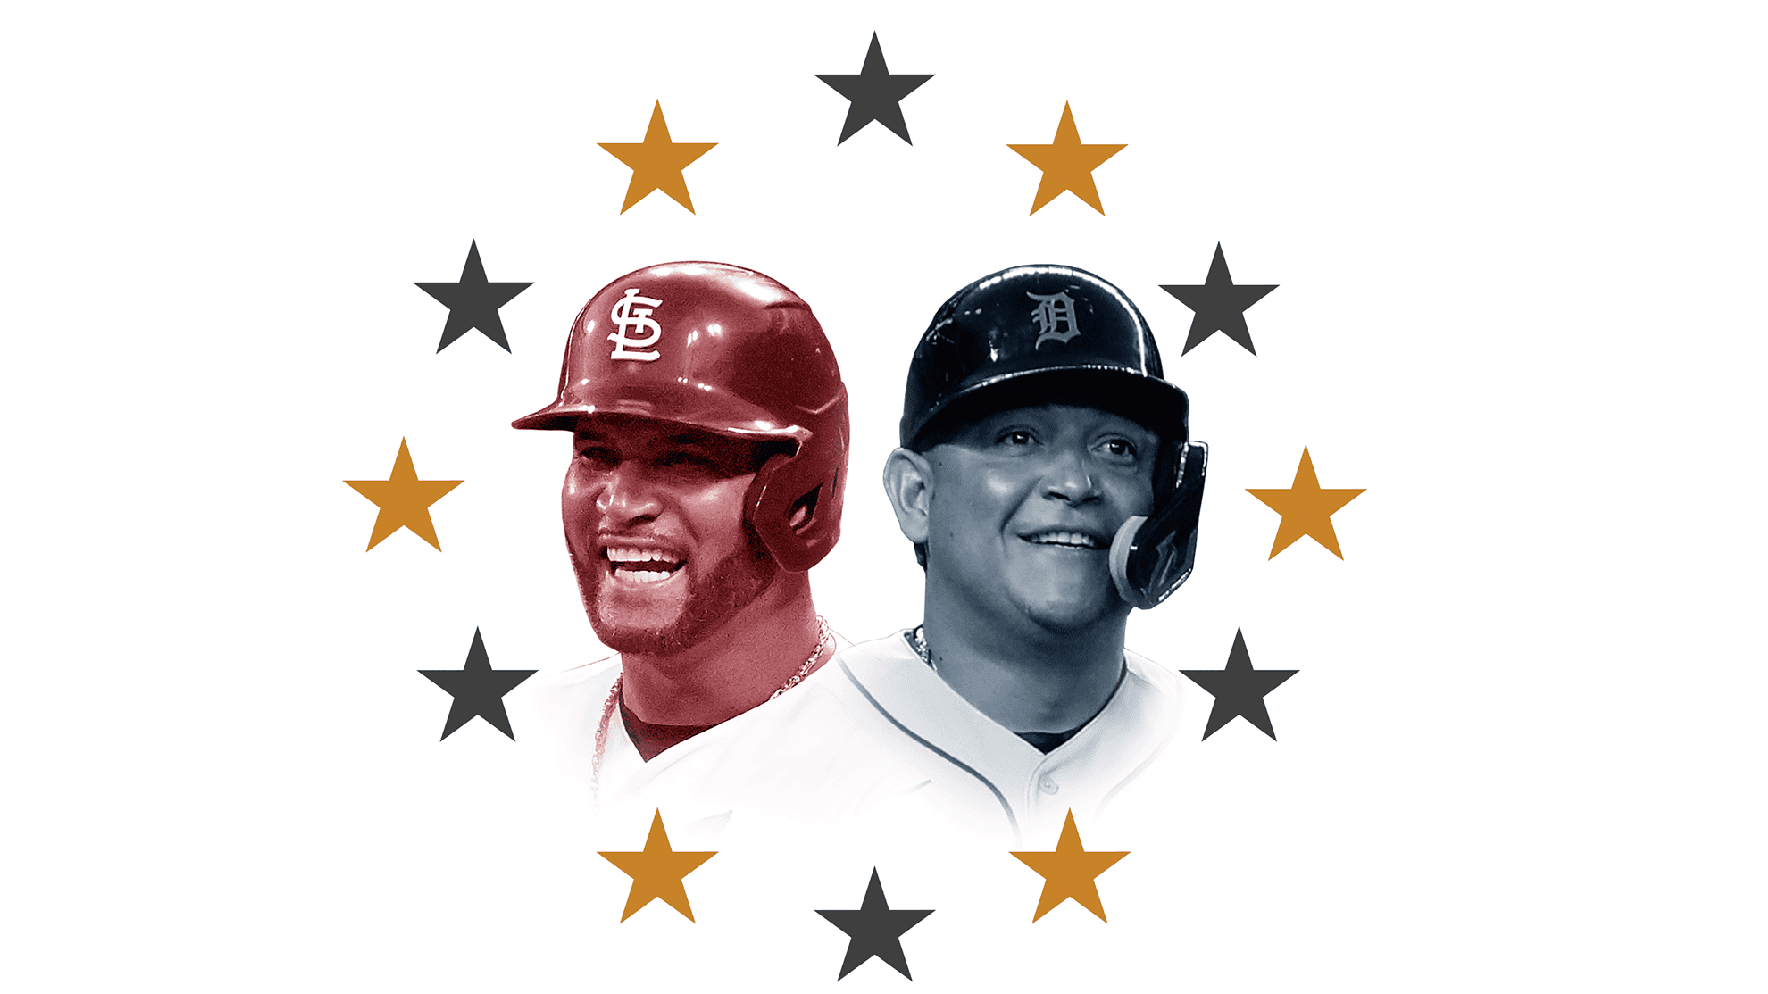 MLB makes right call by adding Pujols, Cabrera to All-Star Game National  News - Bally Sports